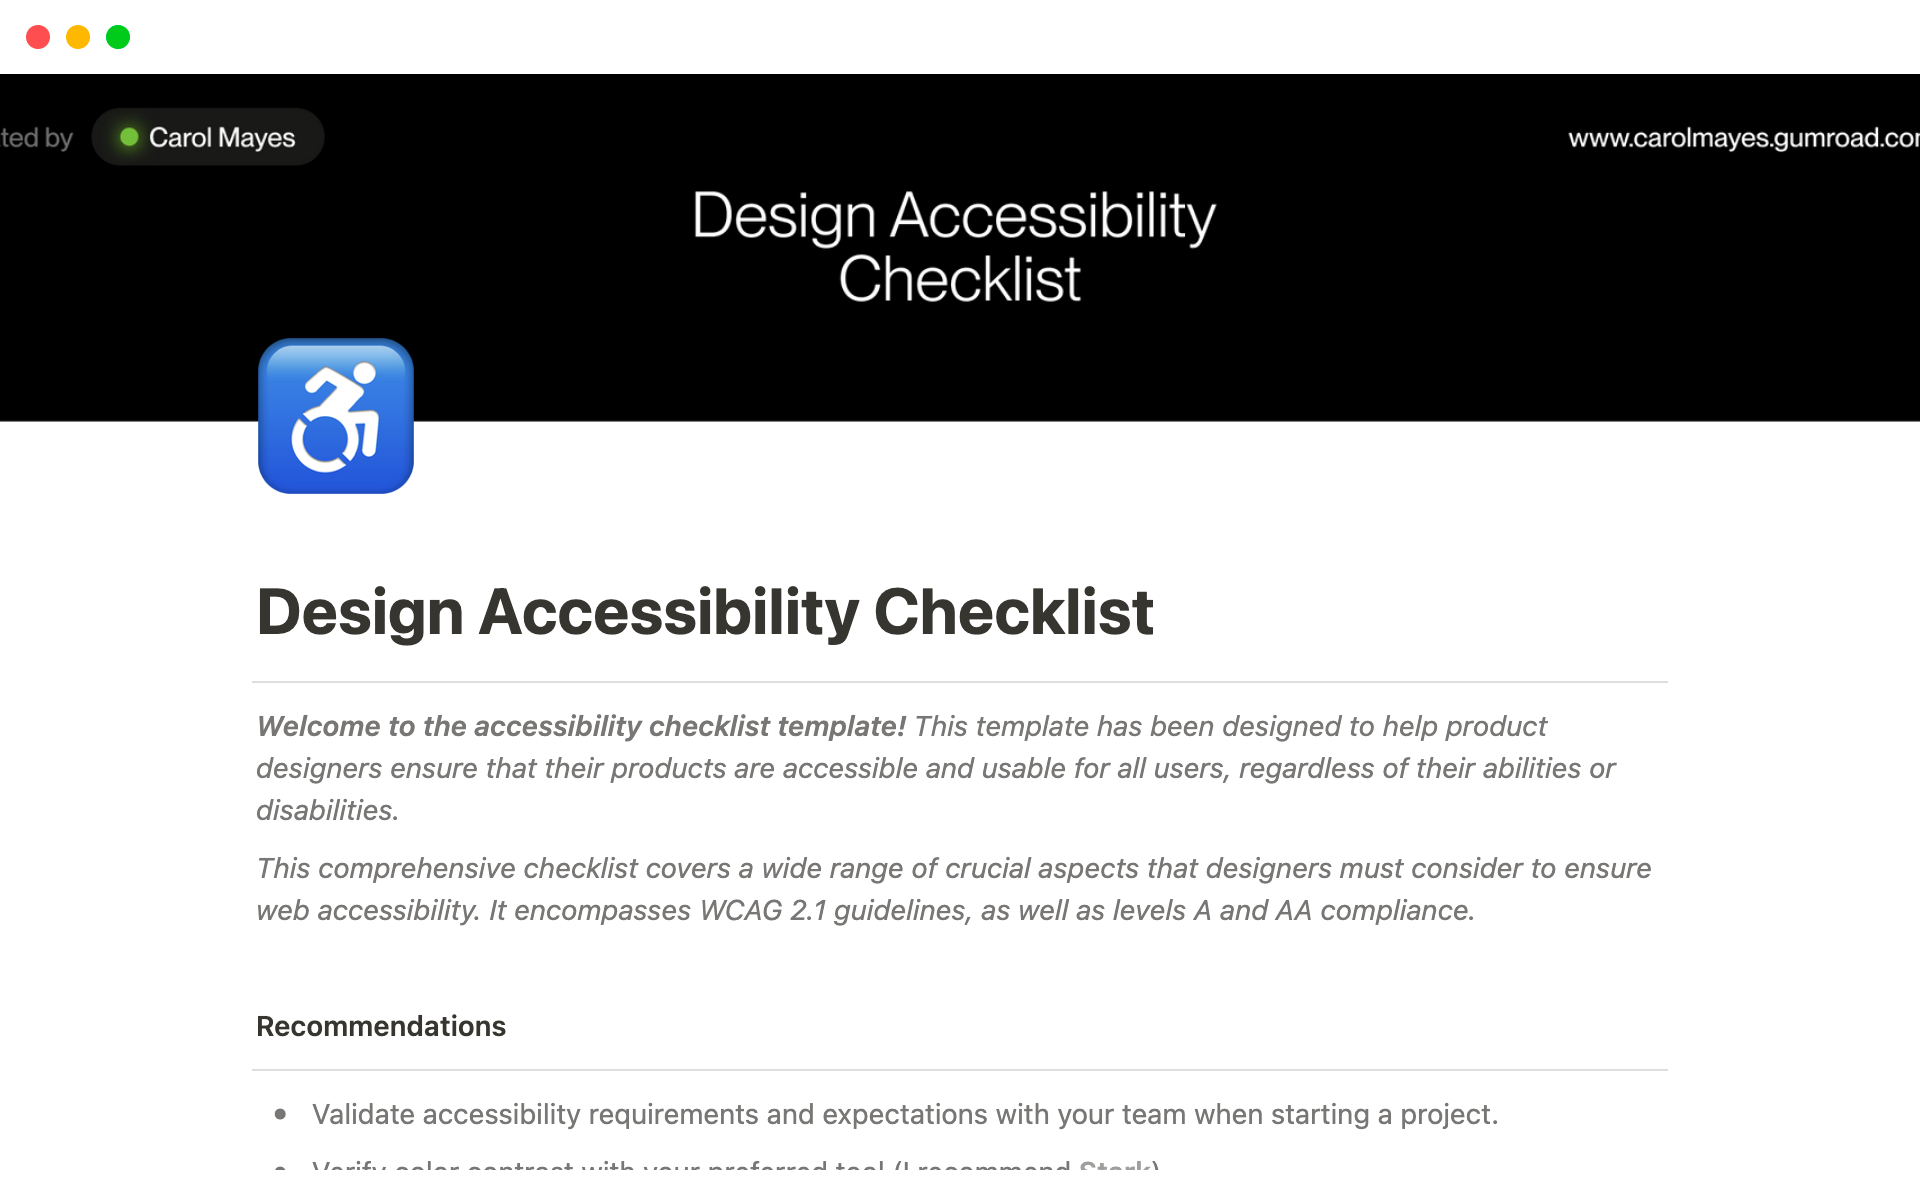 Whether you're a seasoned product designer or just starting out, my accessibility checklist template is a must-have tool for ensuring that your products are inclusive and accessible to all.